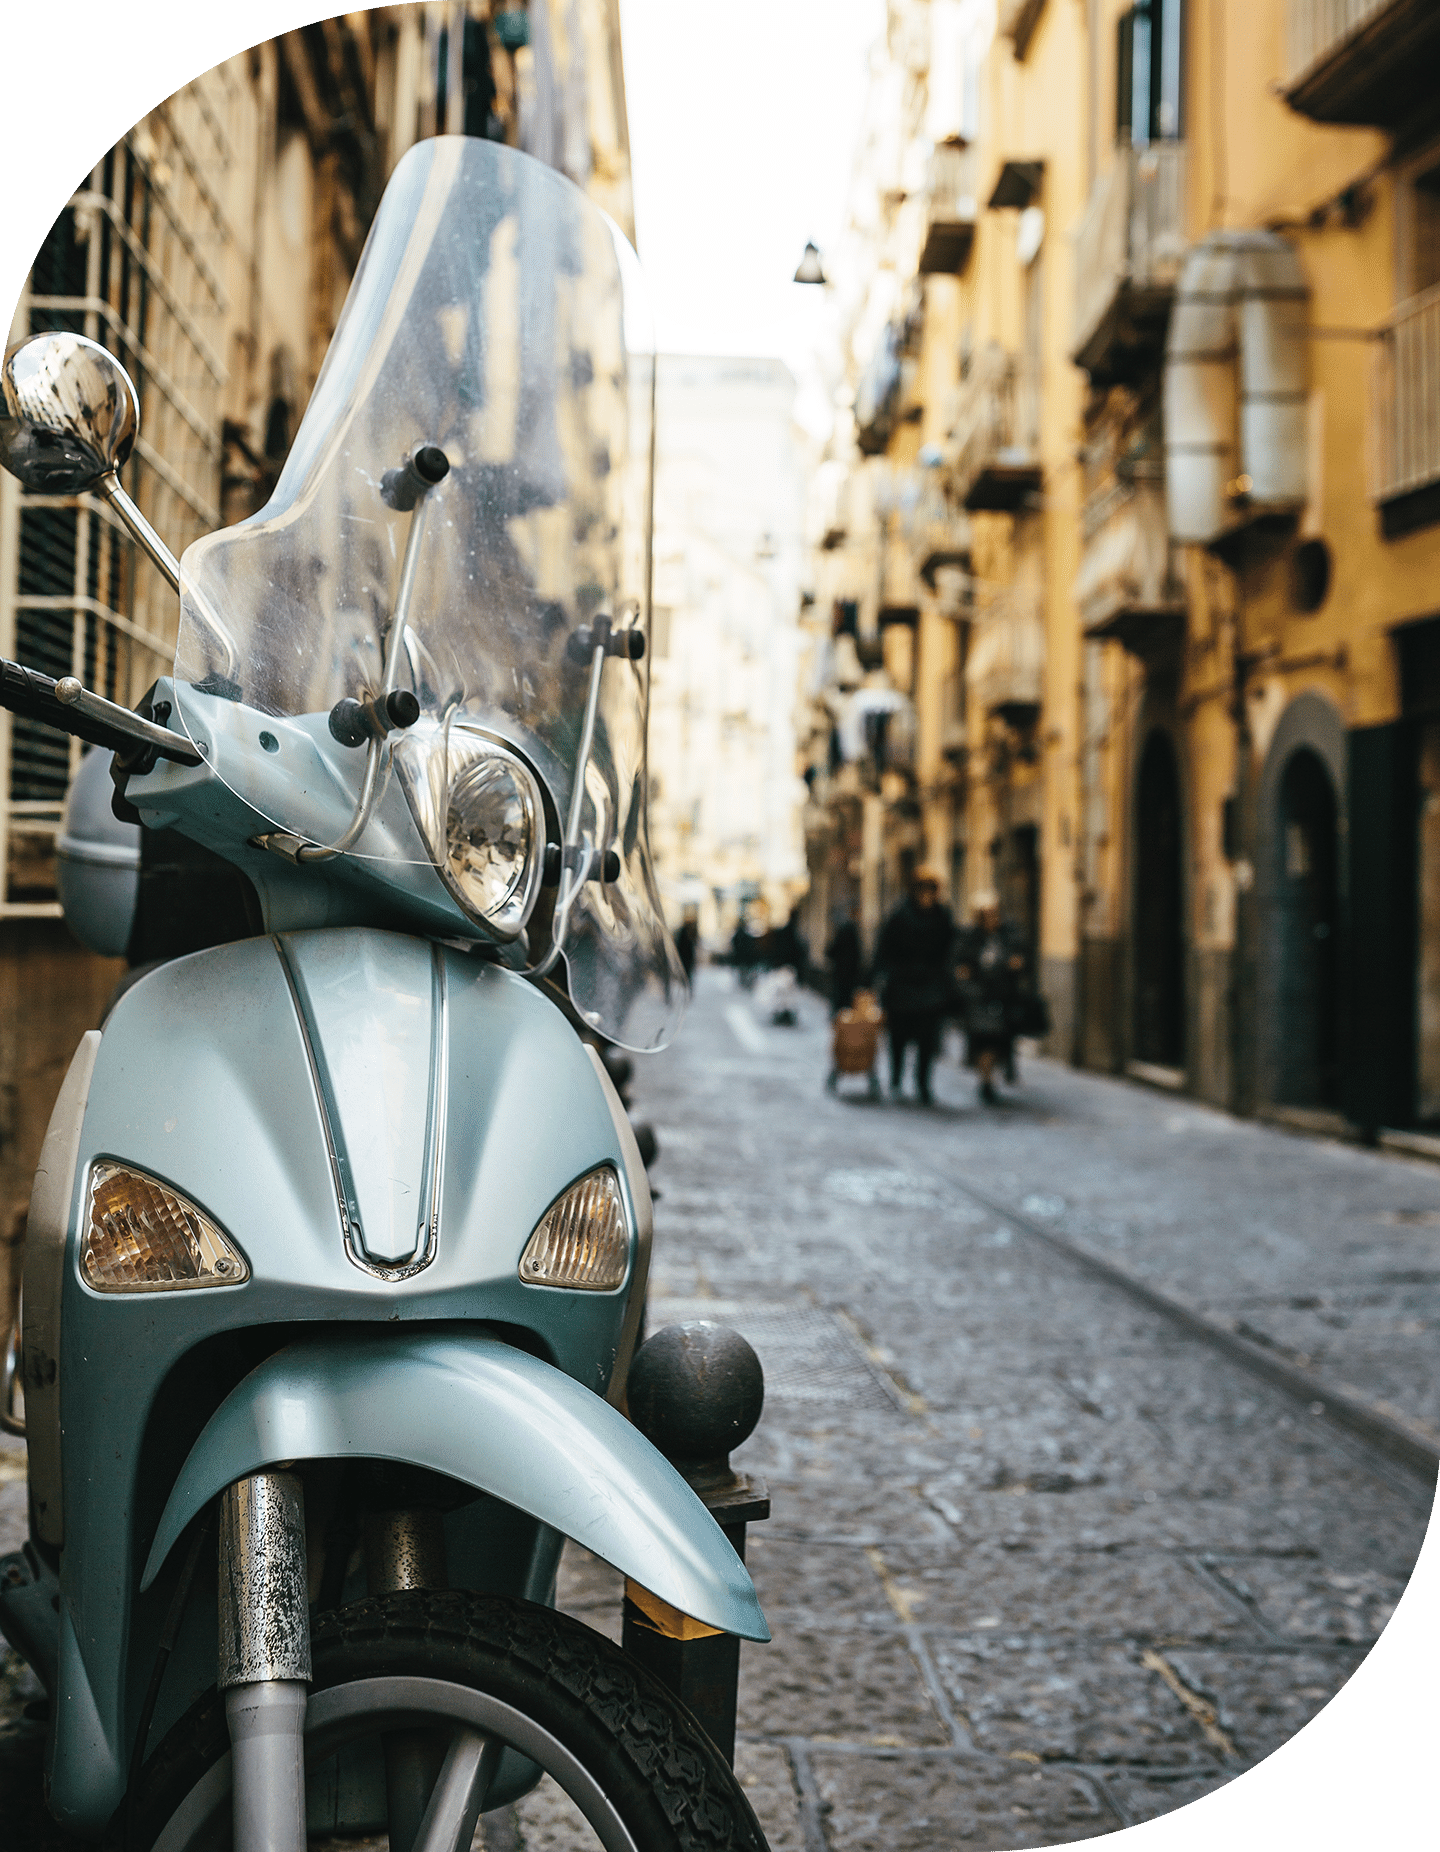 moped-city-streets